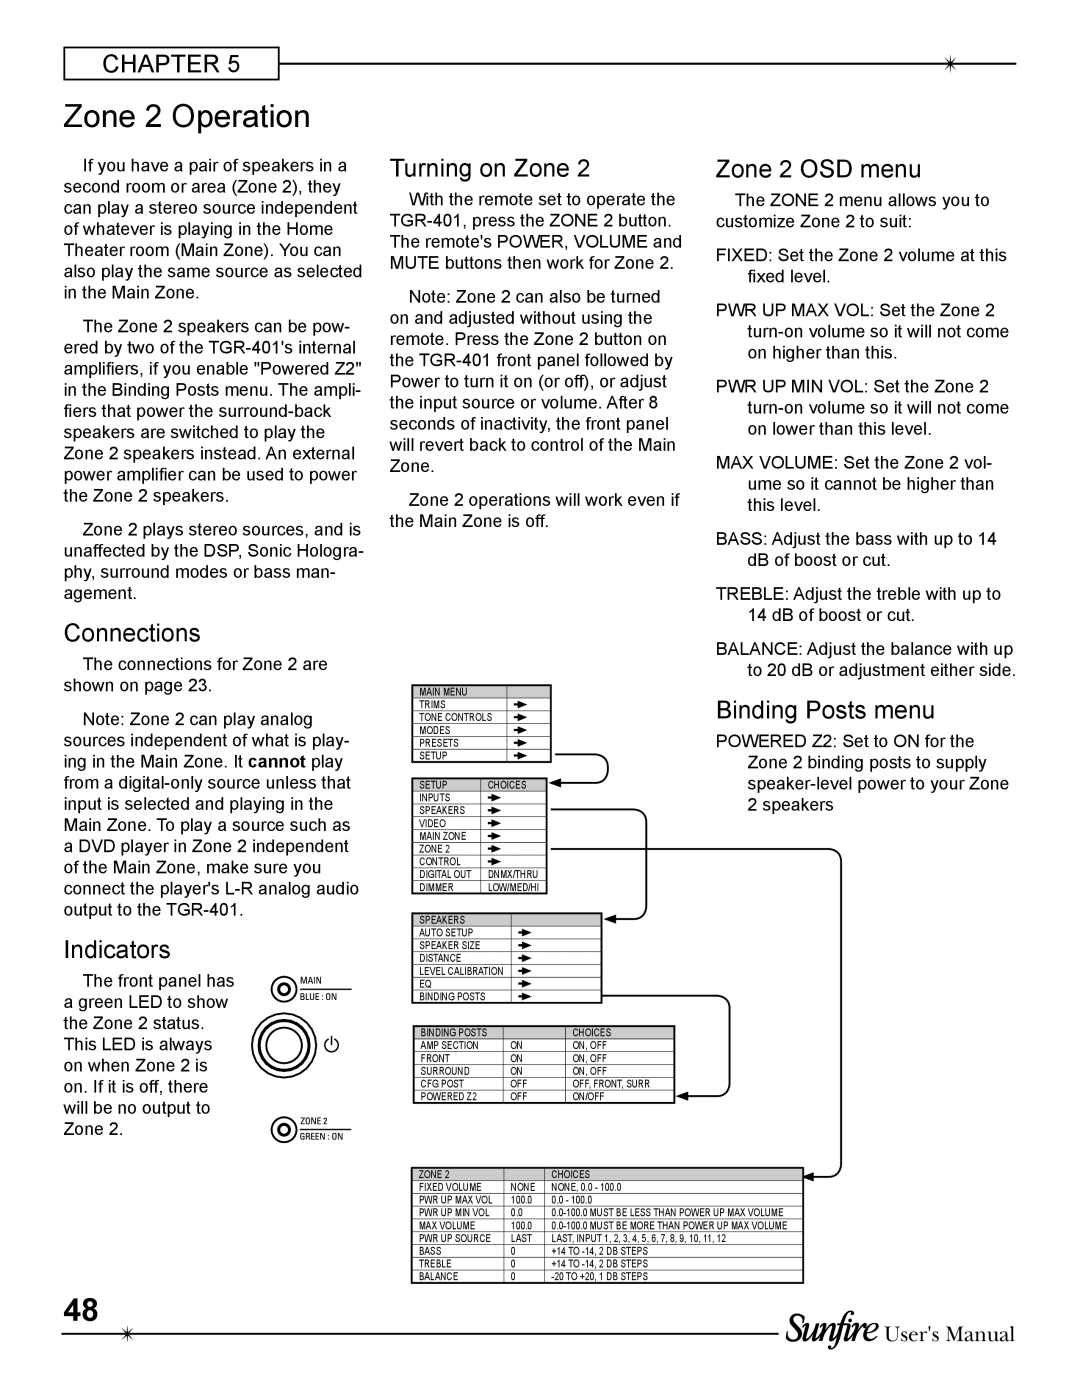 Sunfire TGR-401-230 Zone 2 Operation, Chapter, Connections, Indicators, Turning on Zone, Zone 2 OSD menu, Users Manual 